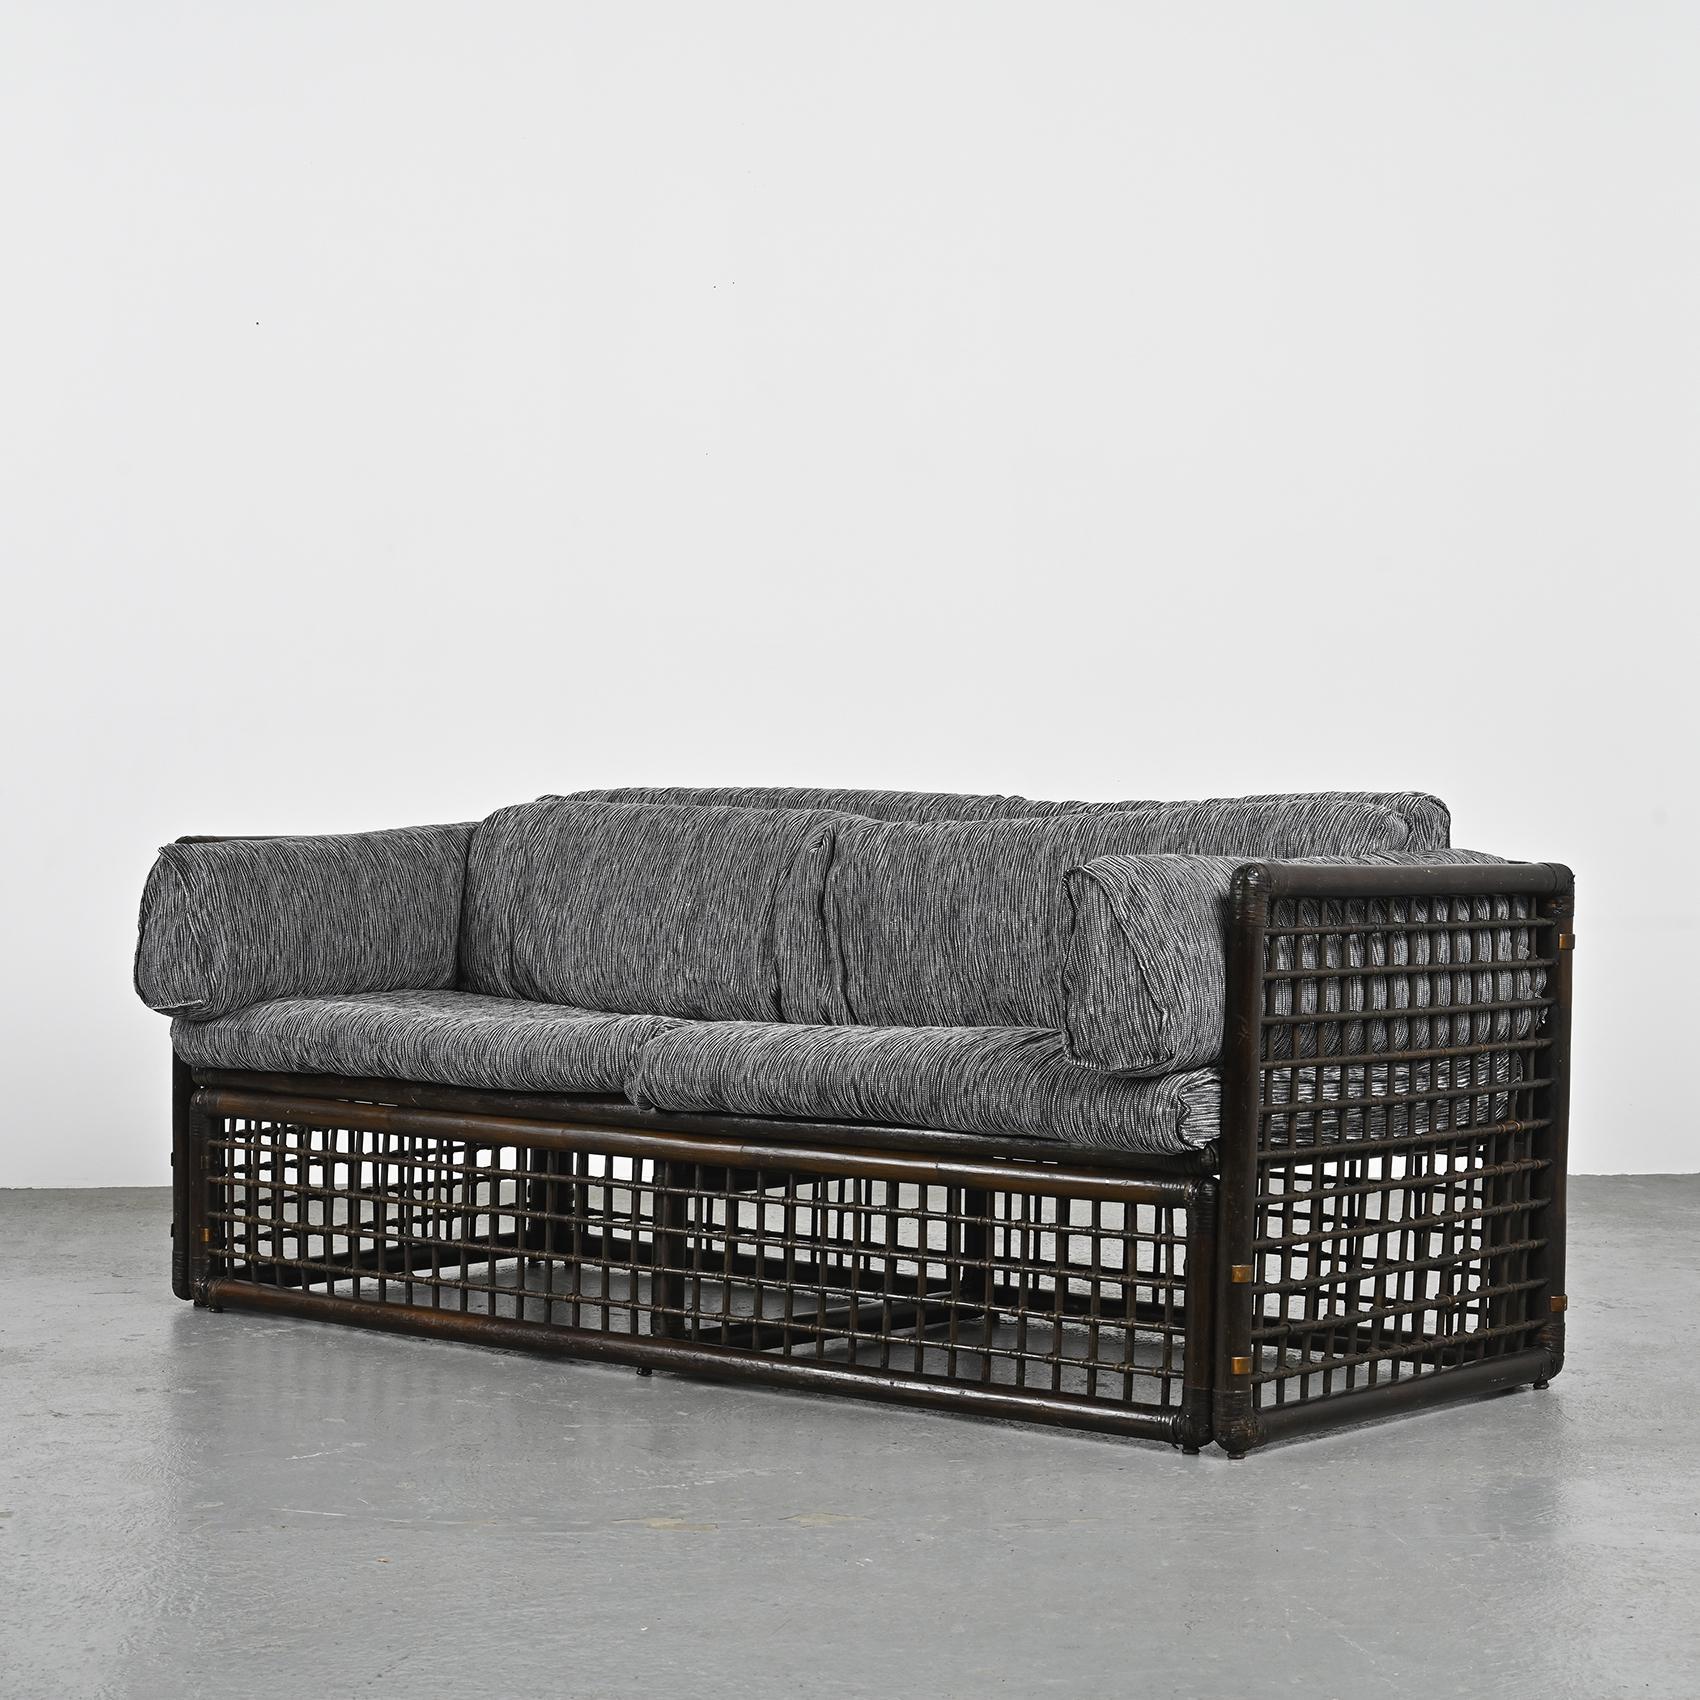 In 1975, Afra & Tobia Scarpa's Basilan 1 sofa debuted, a design gem by B&B Italia, celebrating Italian craftsmanship. This collection reflects the duo's creative brilliance and commitment to timeless design, and is a unique and iconic part of rattan